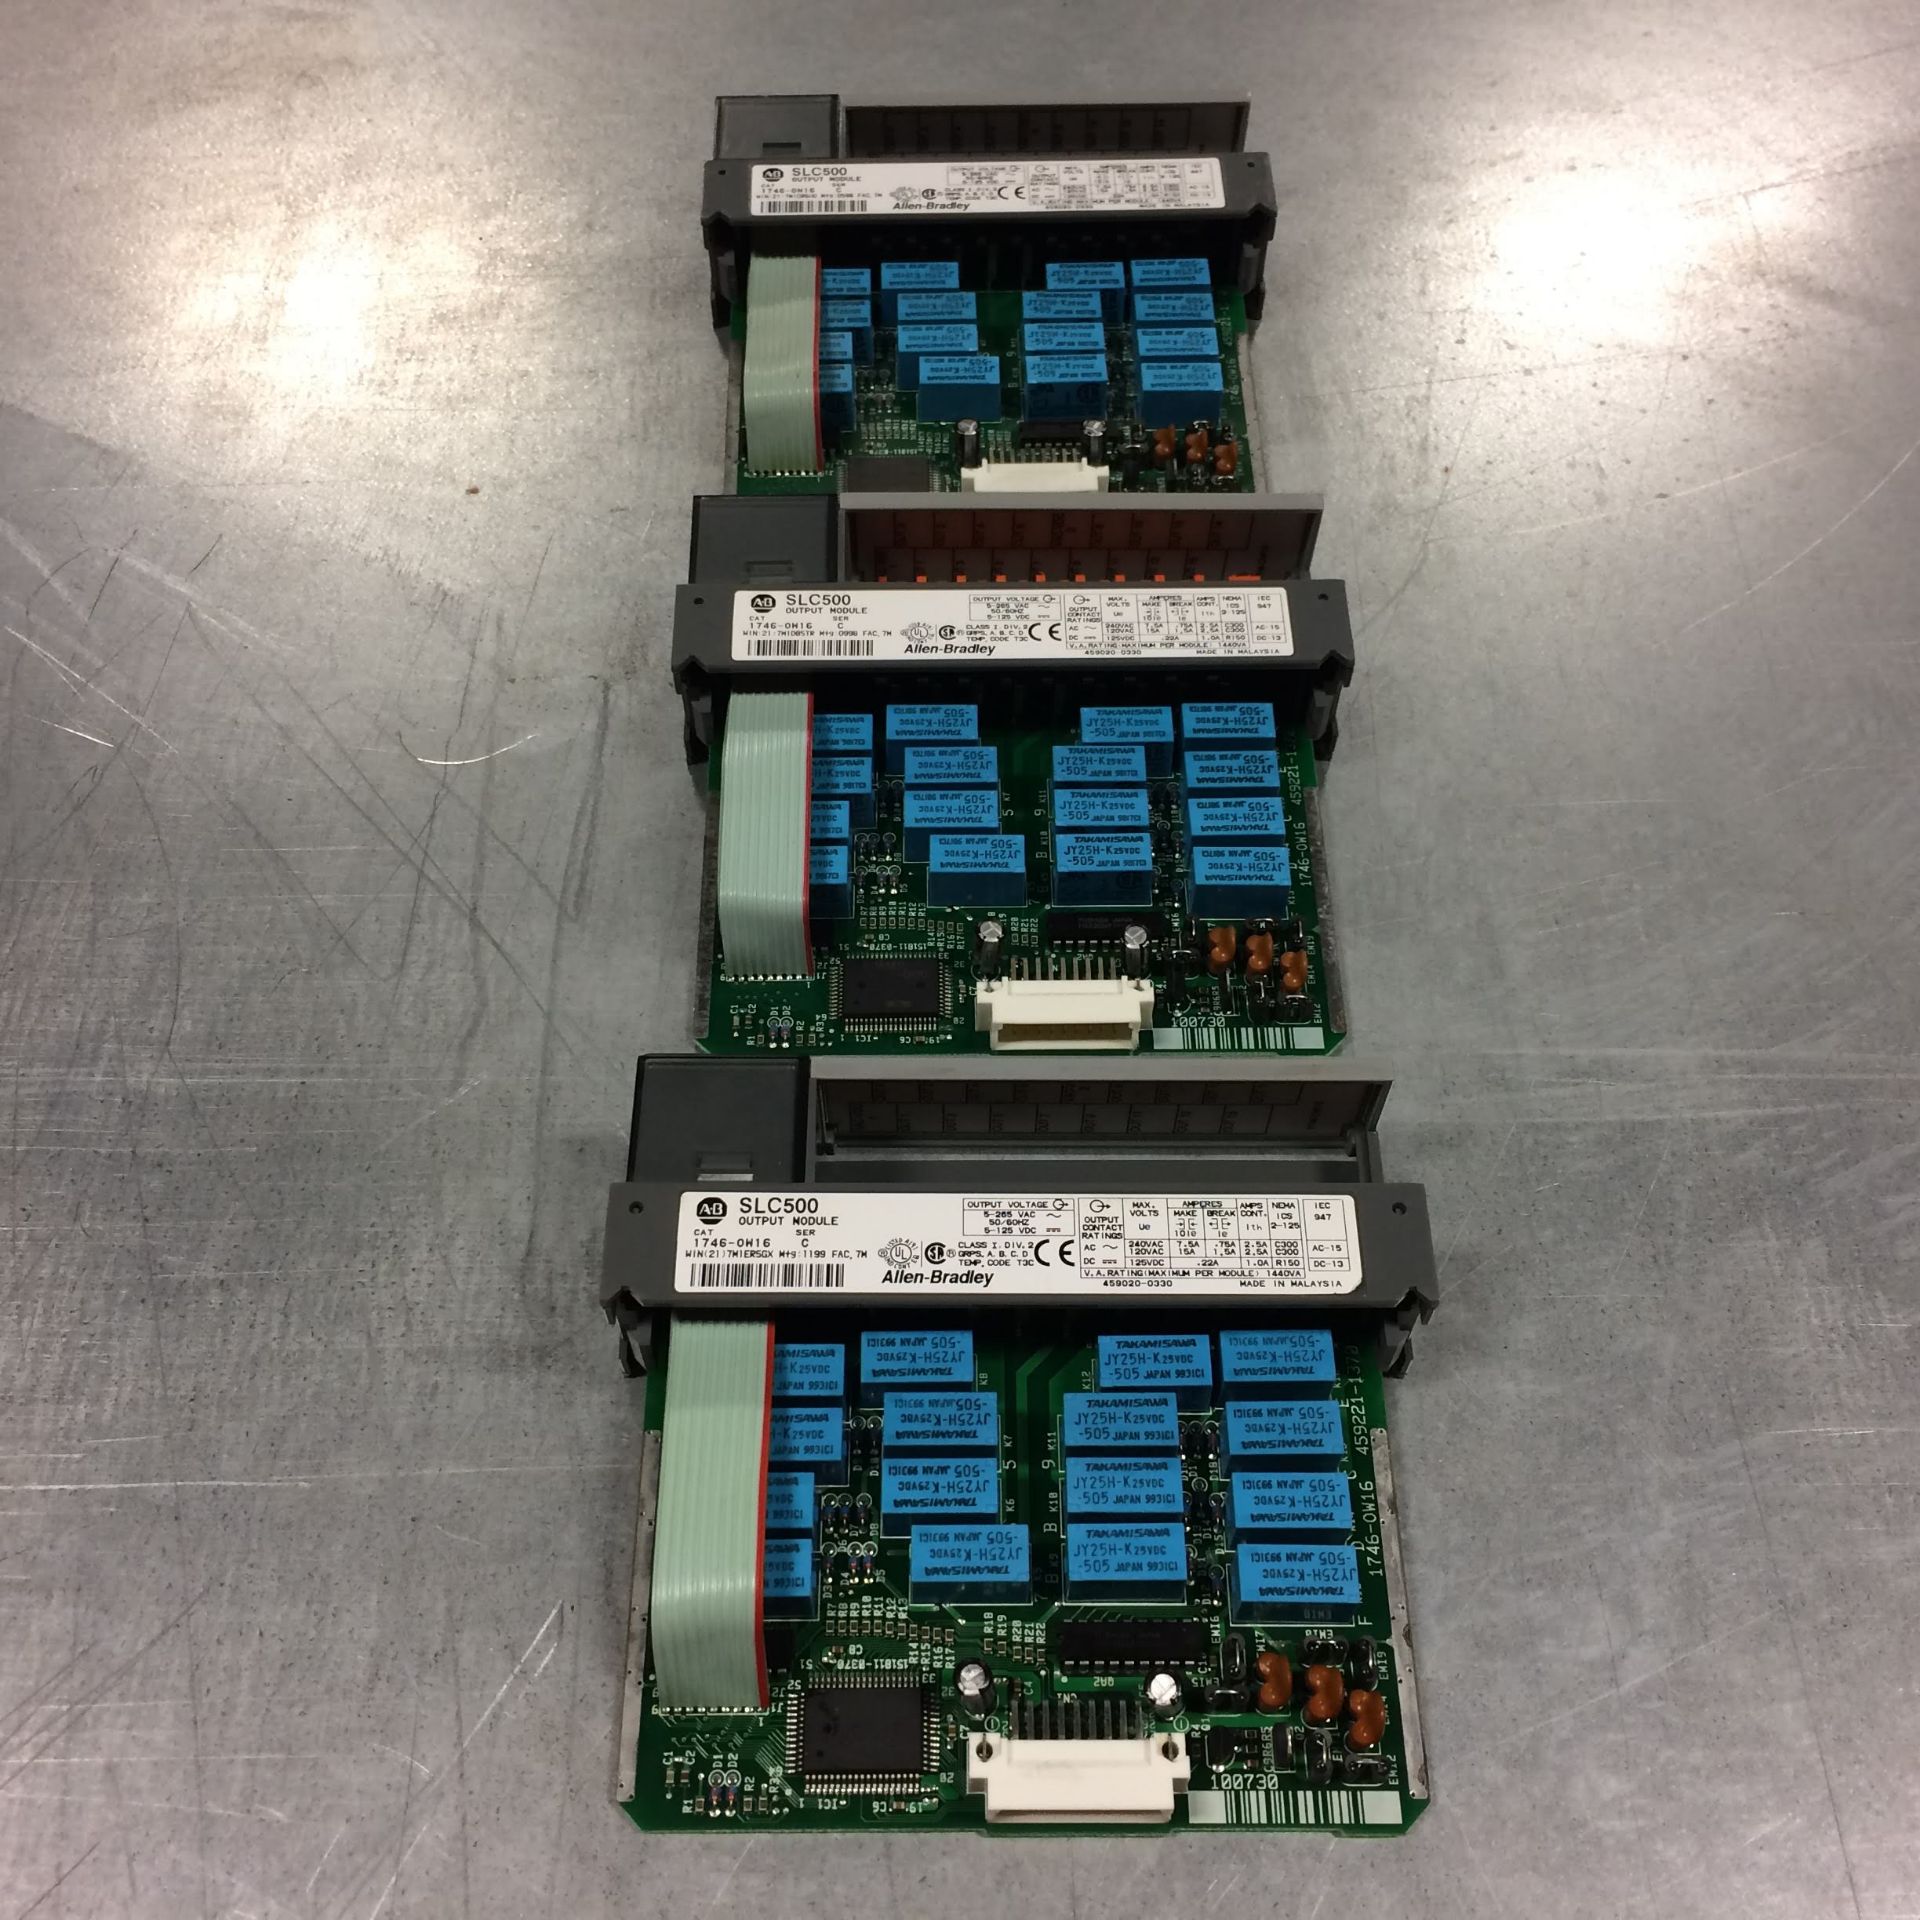 (3) 1746-OW16 ALLEN BRADLEY OUTPUT MODULE USED. Pickup your lot(s) for free! Shipping is available